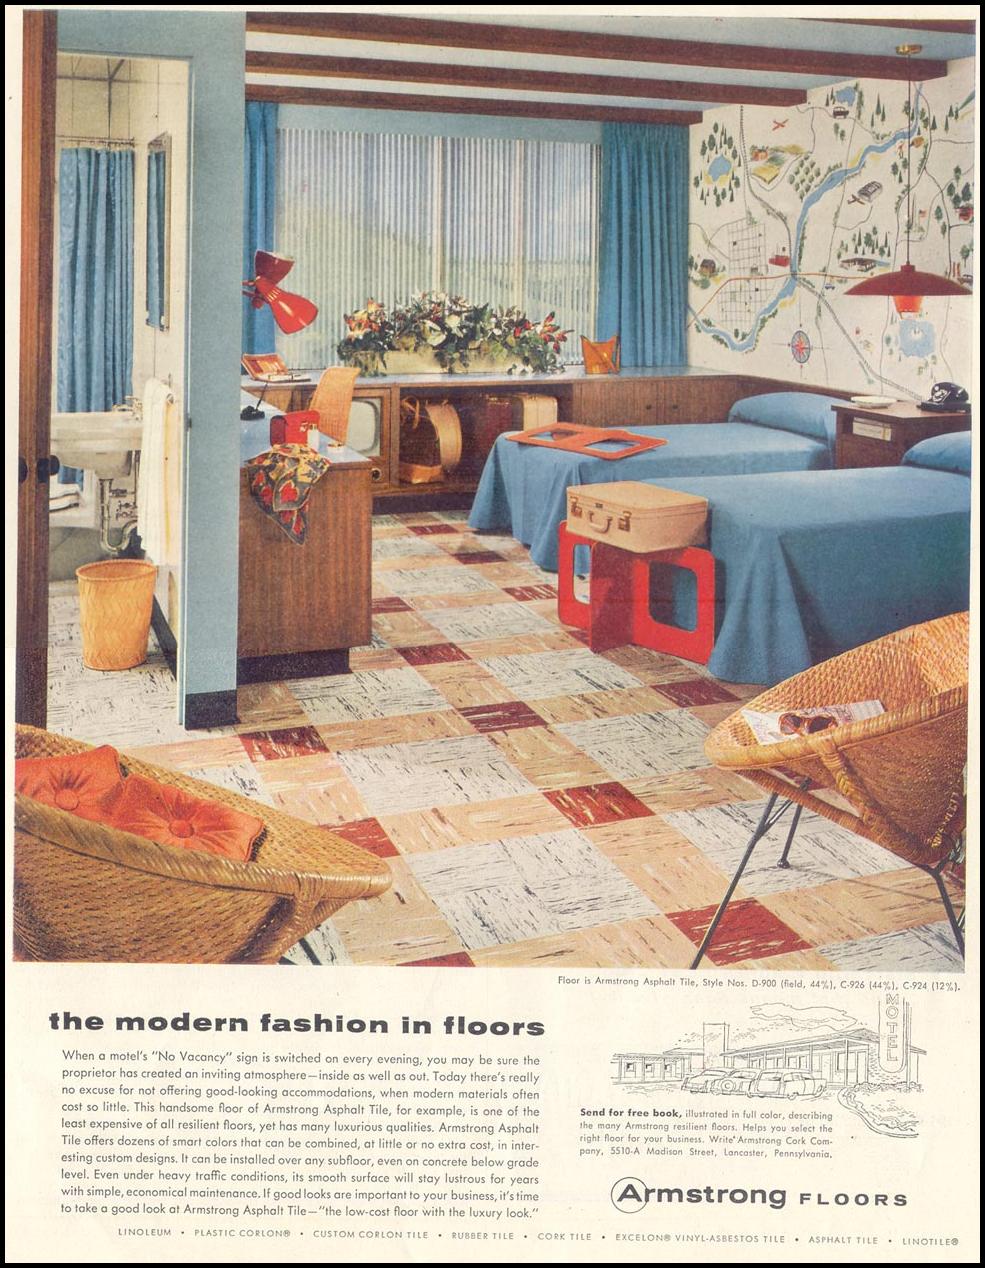 ARMSTRONG FLOORS
LIFE
10/29/1955
p. 11